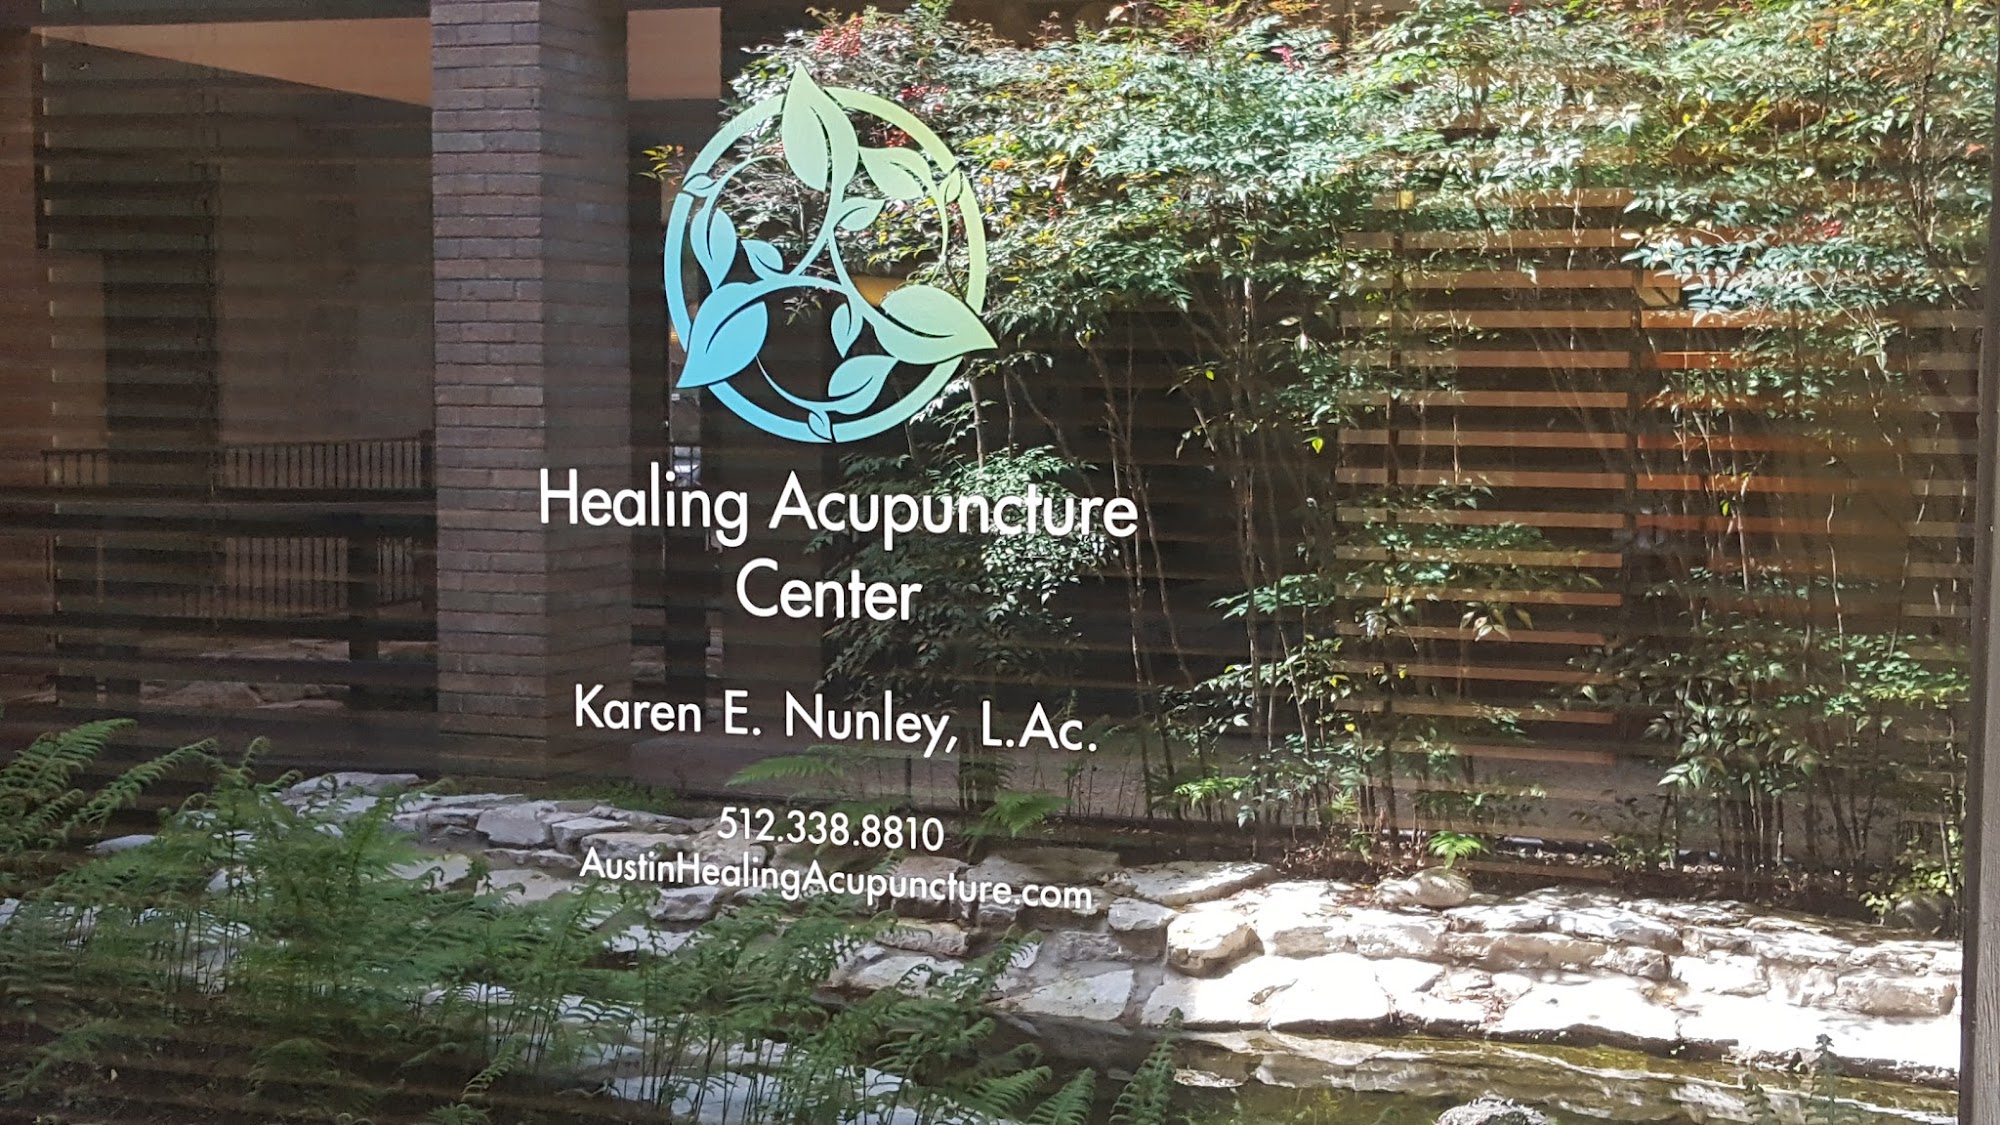 The Healing Acupuncture Center